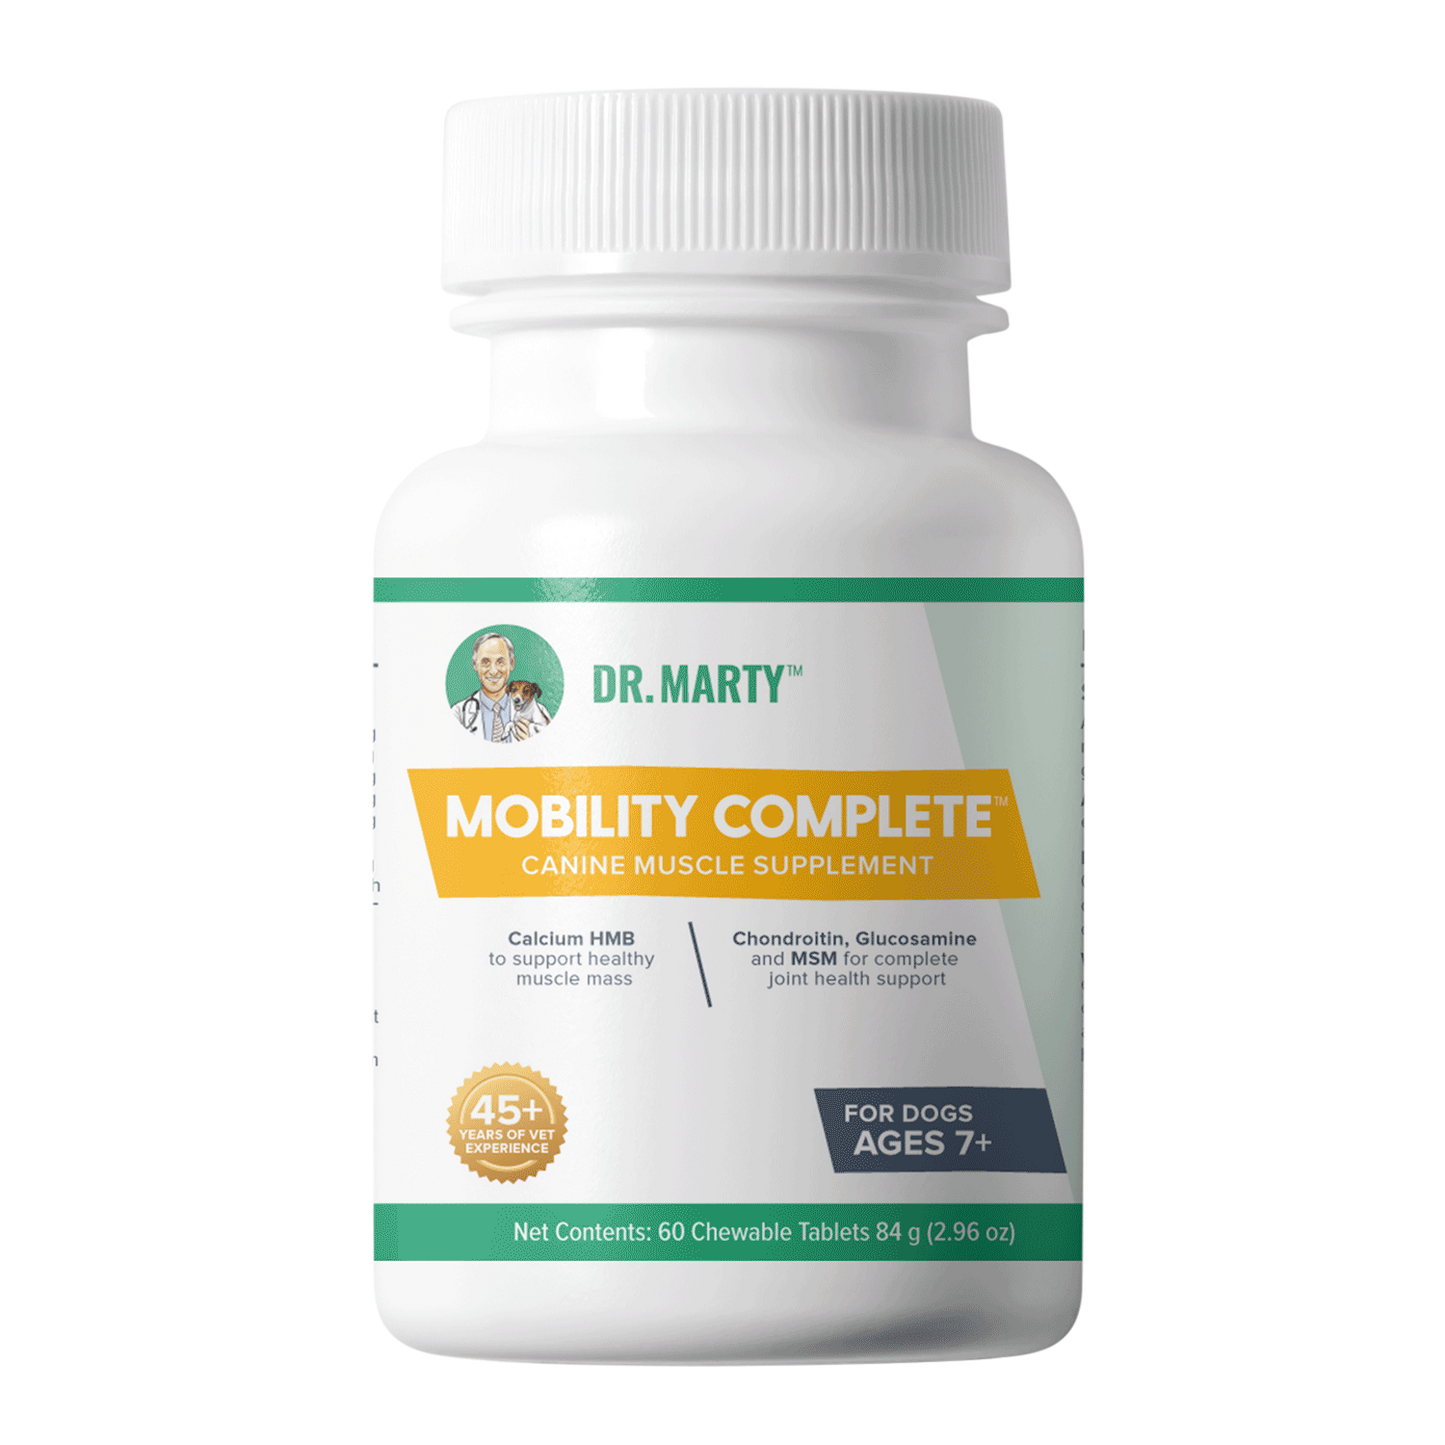 Dr. Marty Canine Muscle Mobility Complete 30 ct.